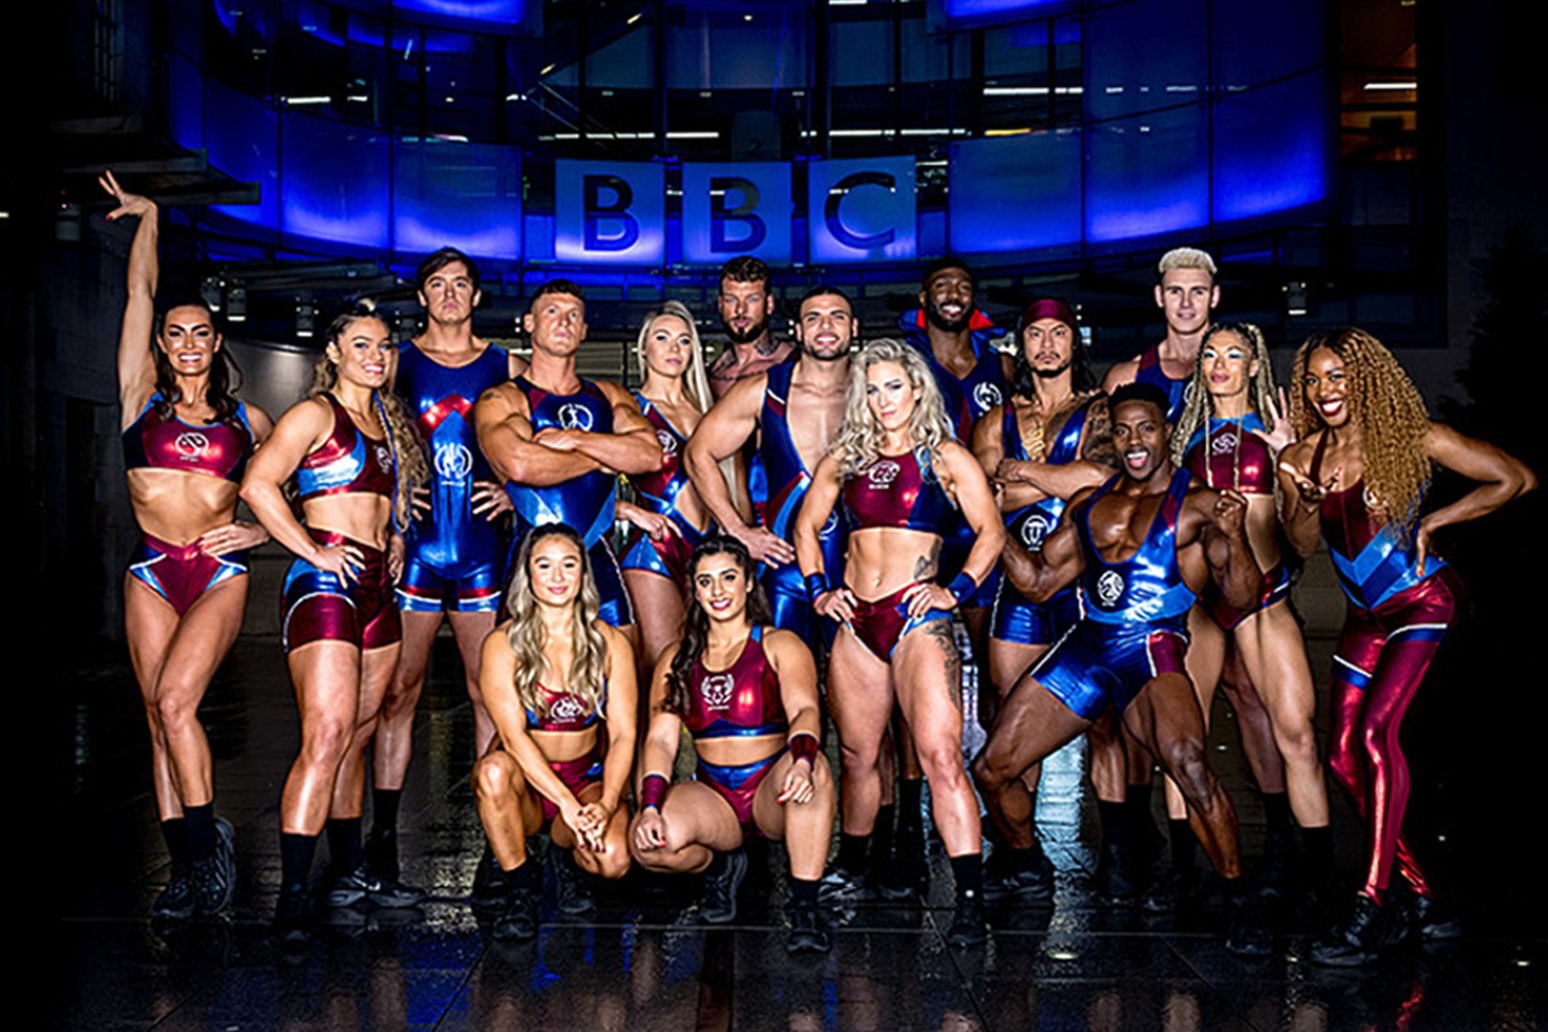 Gladiators returns with ‘superhuman’ line-up of Olympians and bodybuilders 